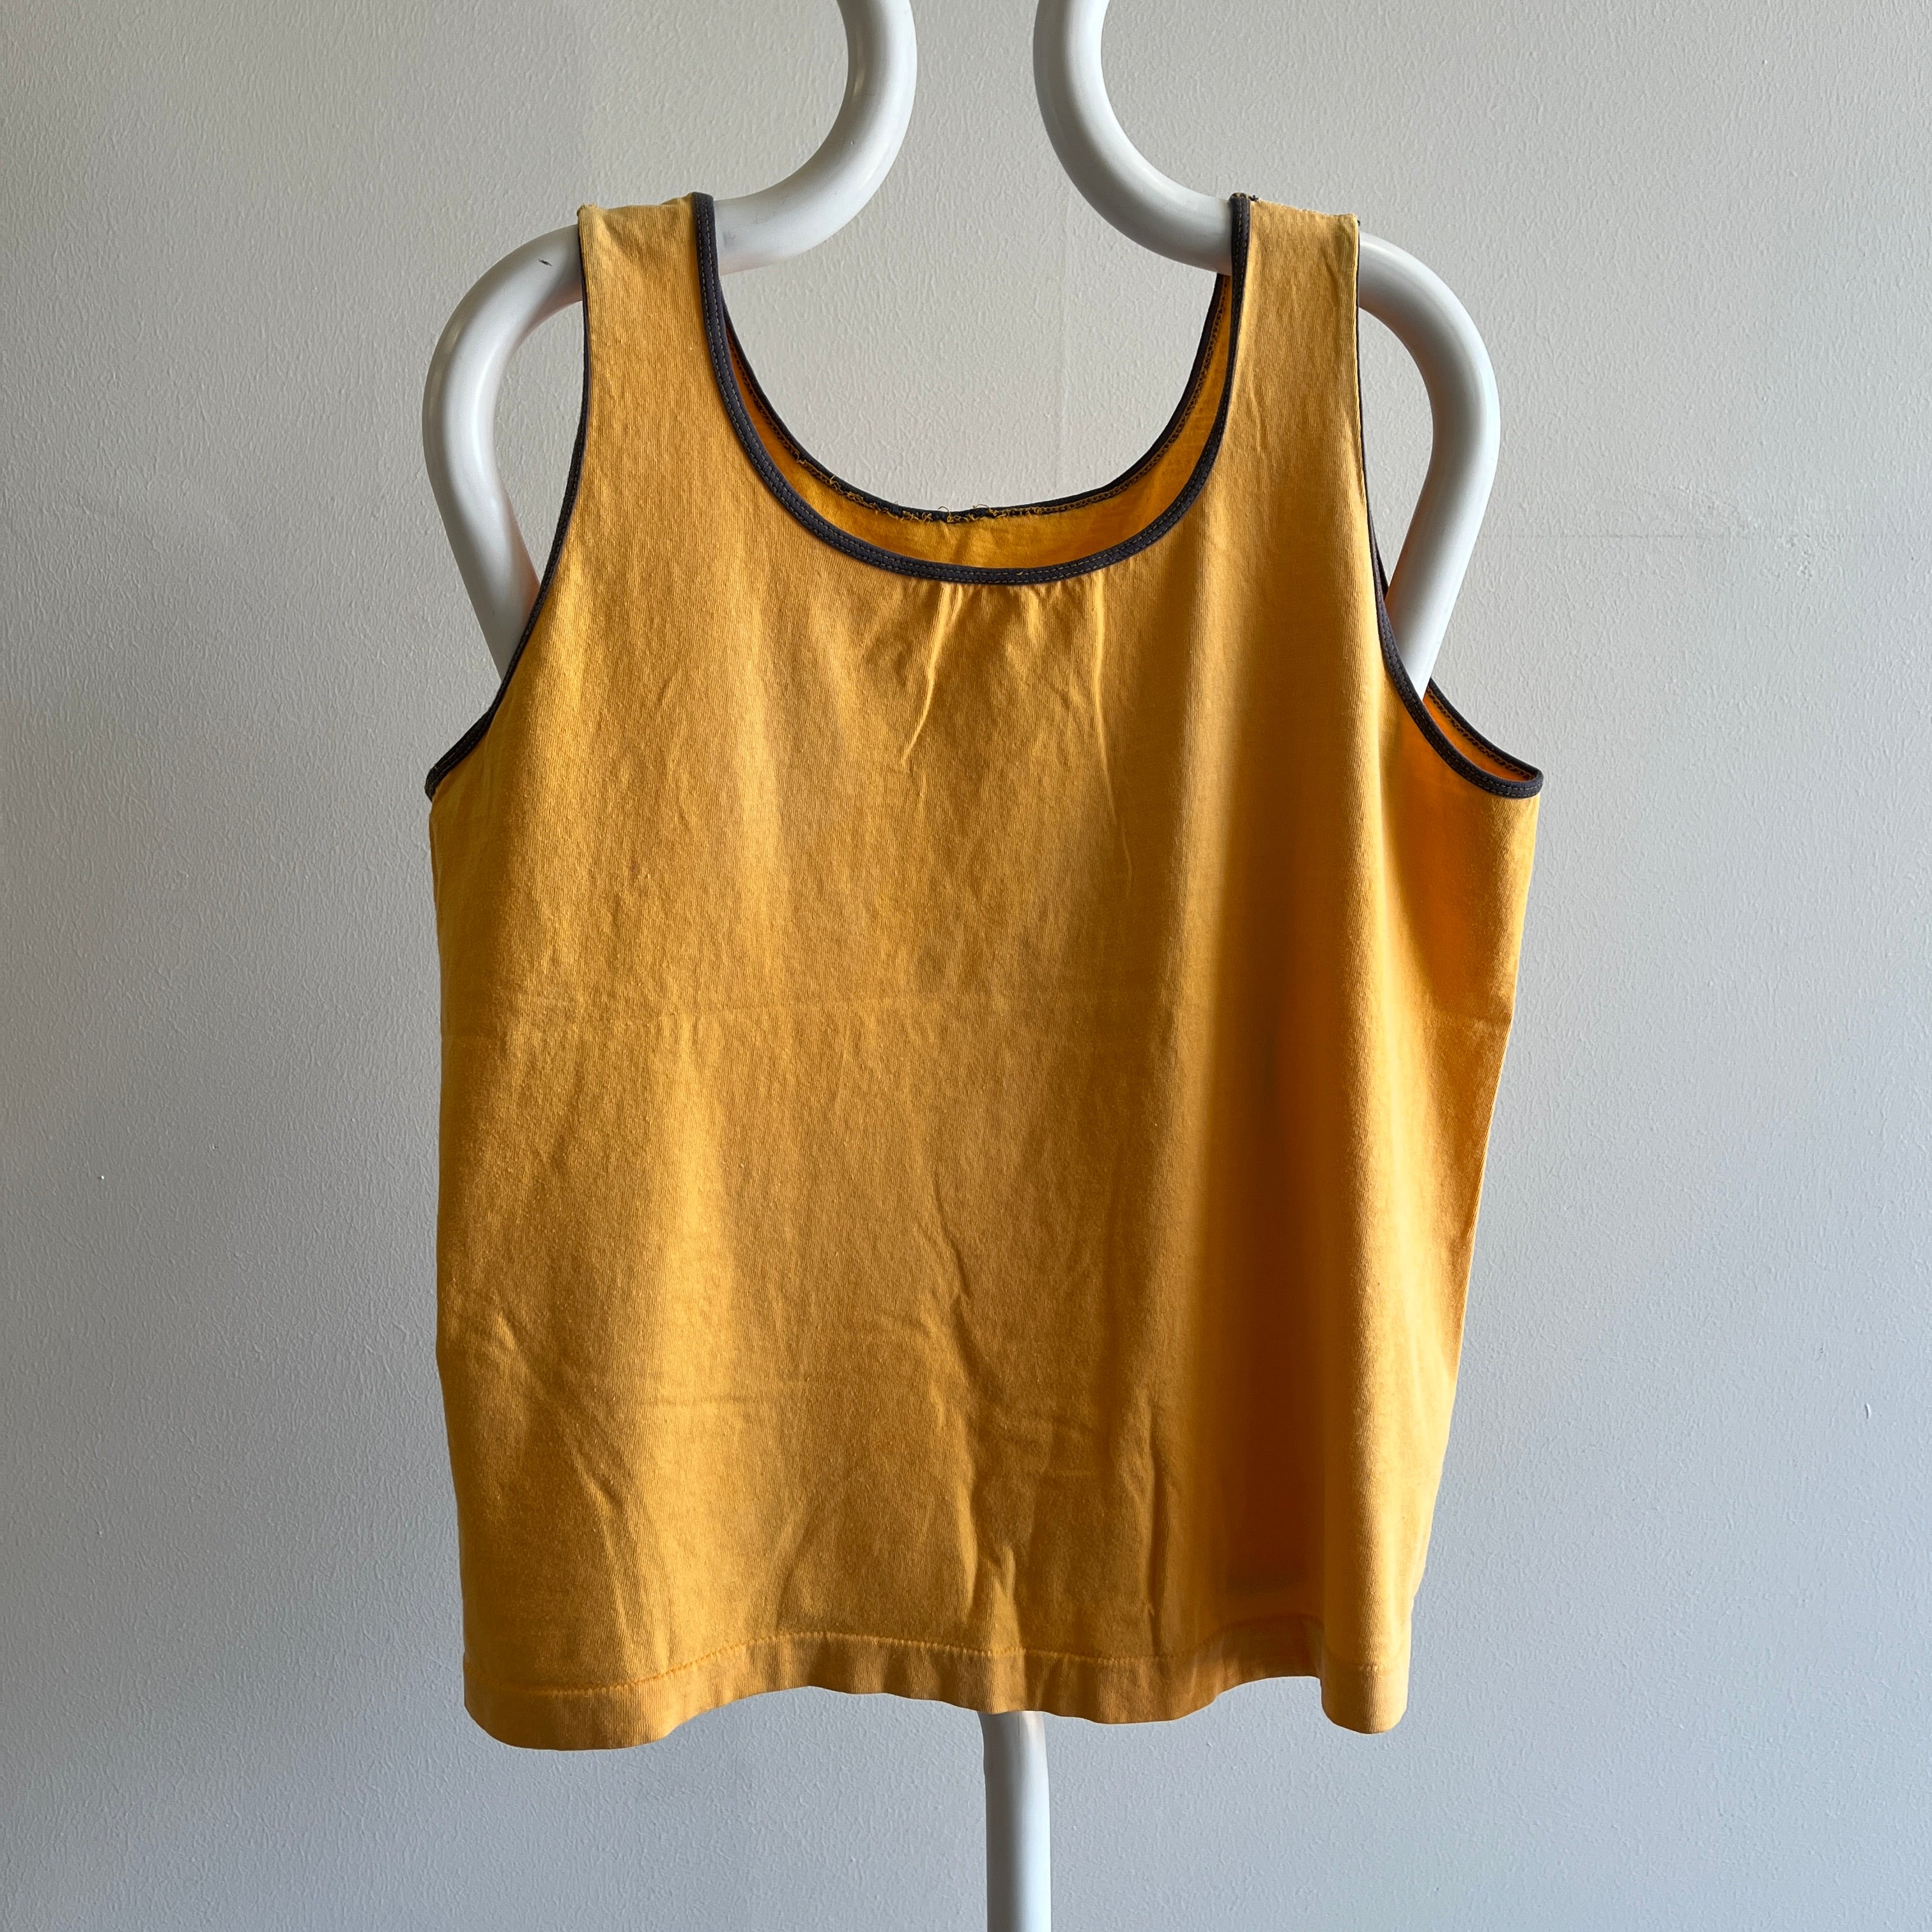 1970s Mr. Norm No. 1 Faded Cotton Tank Top - WOWOW